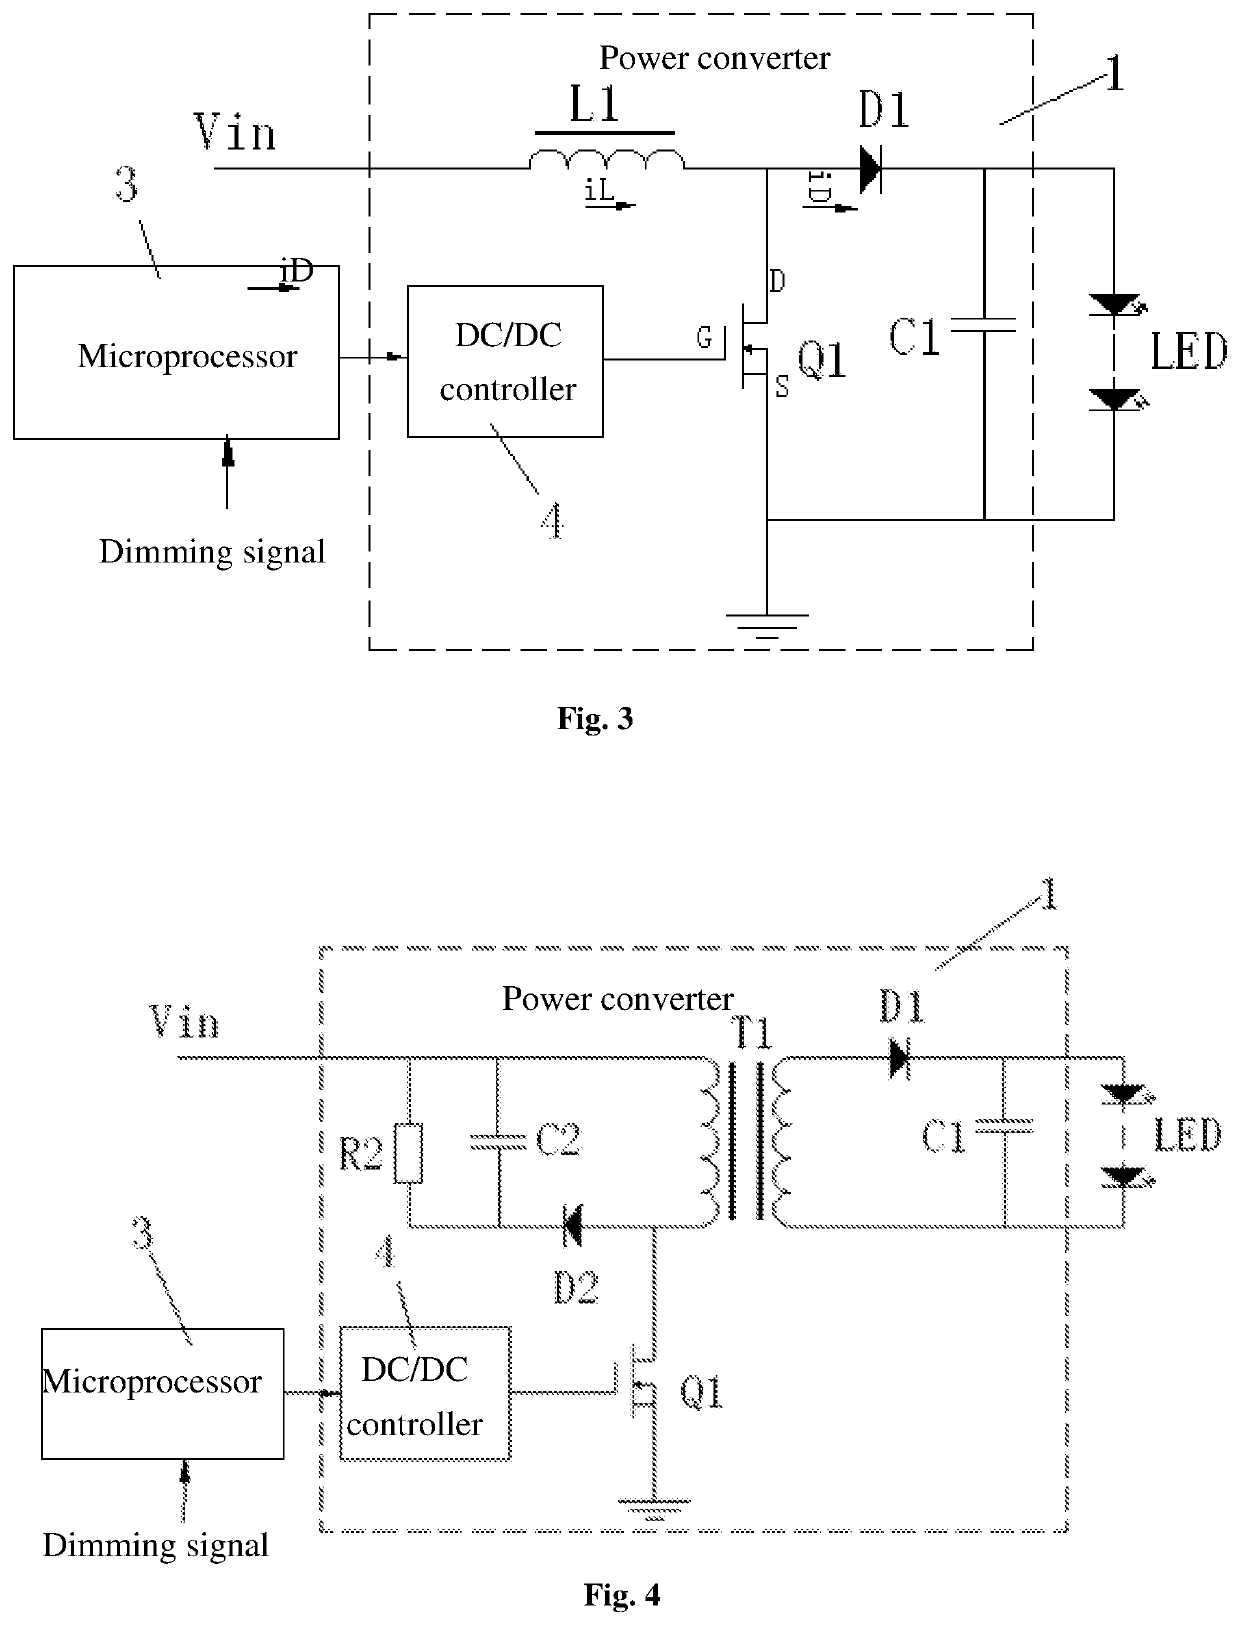 Constant current dimming apparatus for LED lamp